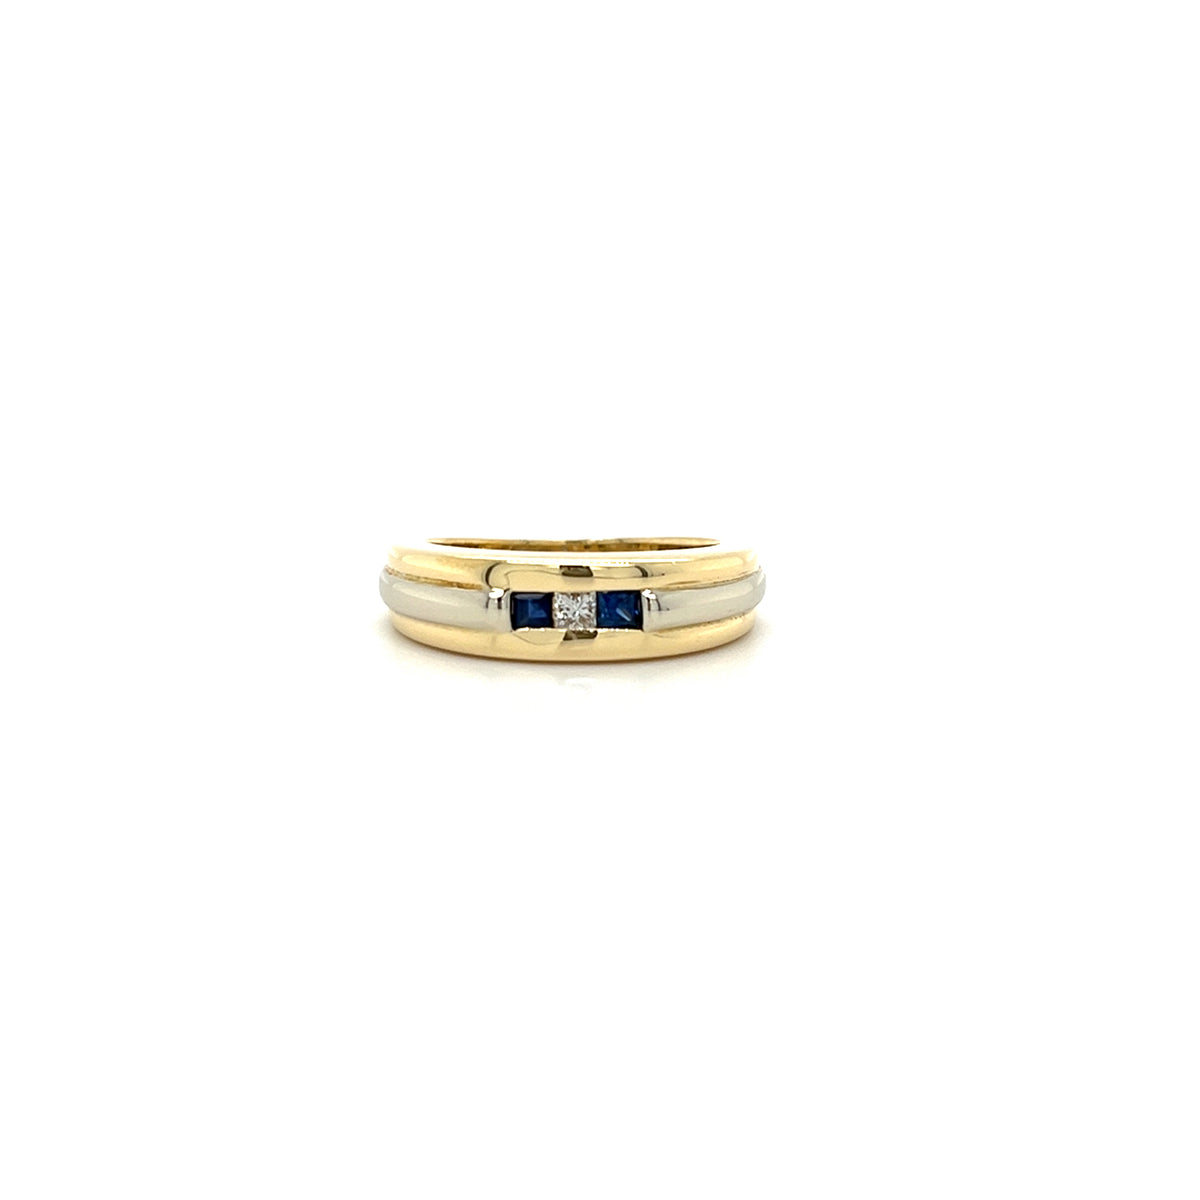 14KT YELLOW GOLD FANCY MENS DIAMOND AND SAPHIRE BAND